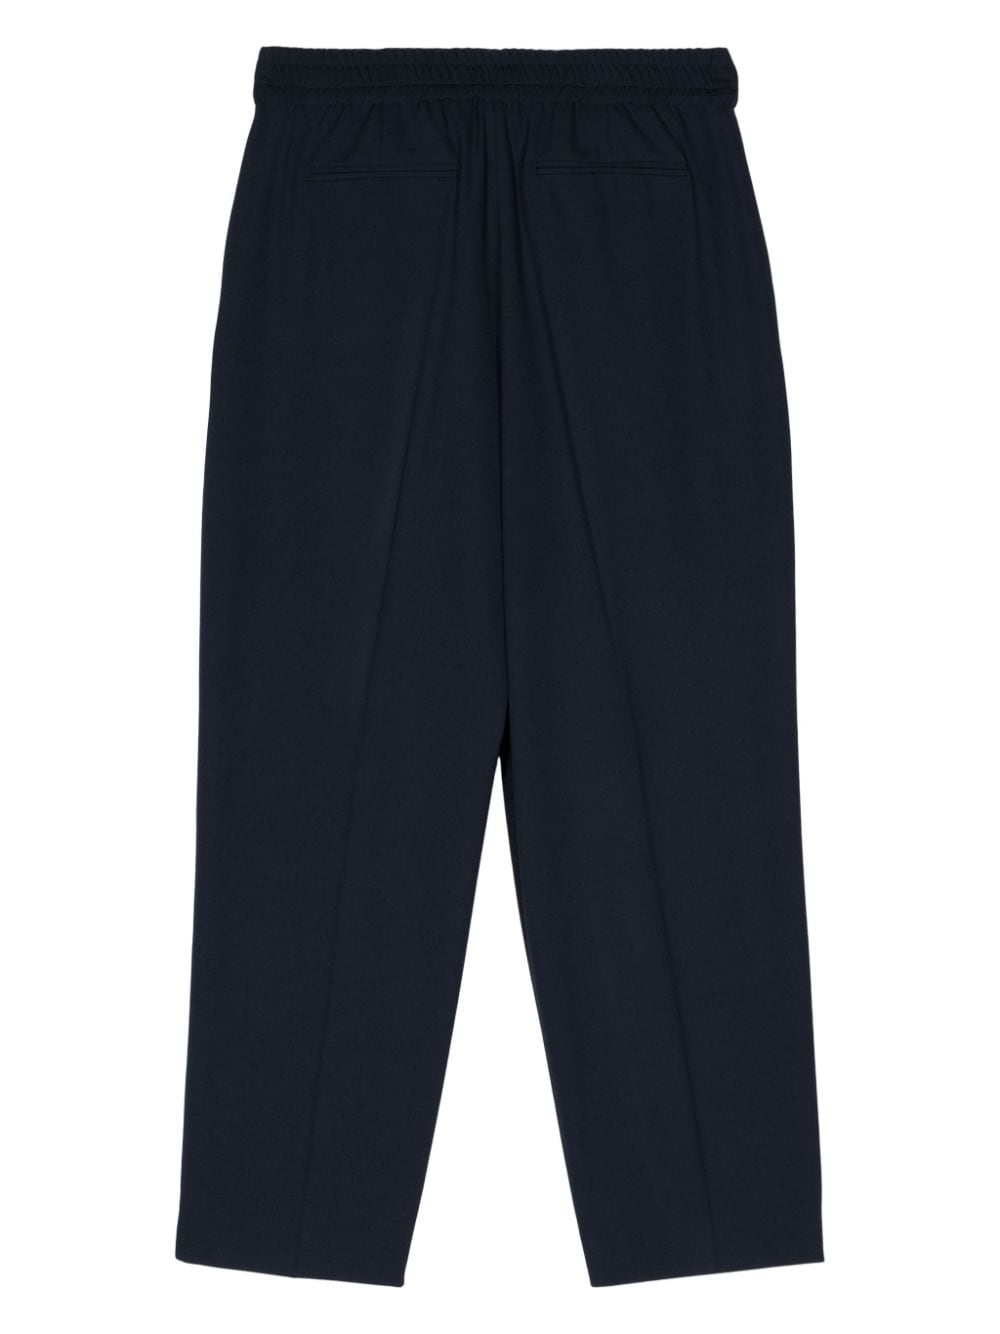 PT Torino mid-rise tailored trousers - Blauw